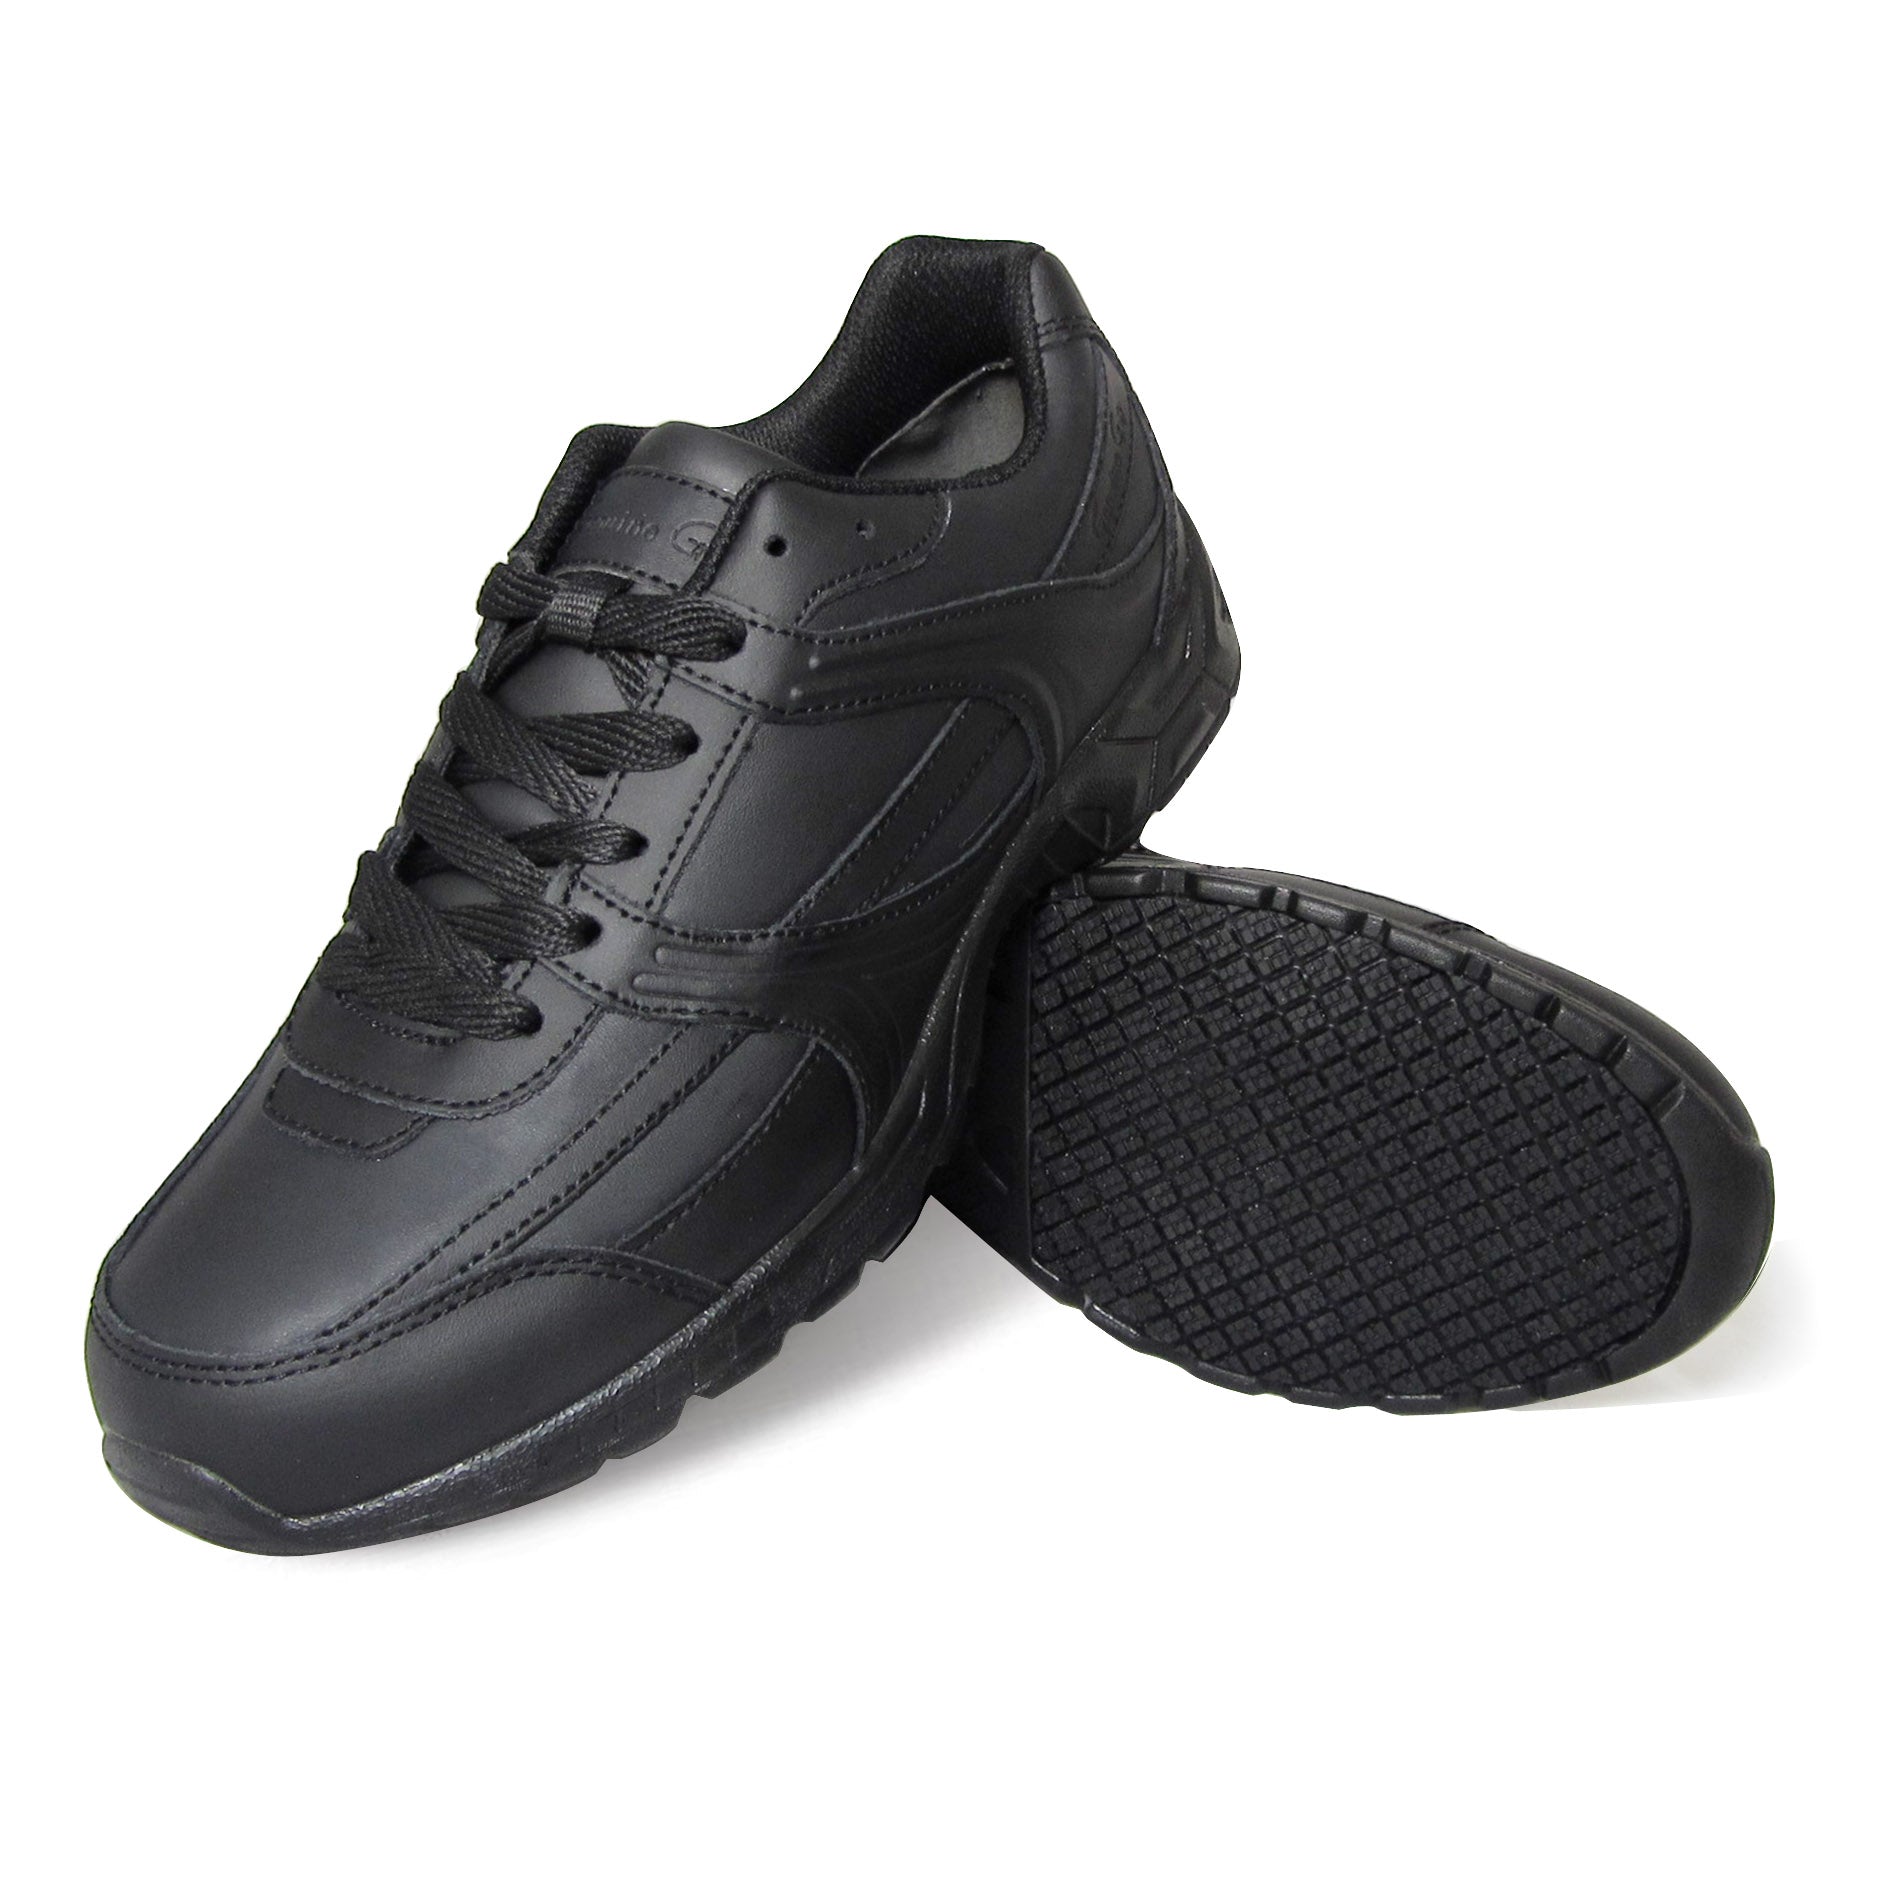 athletic style shoes